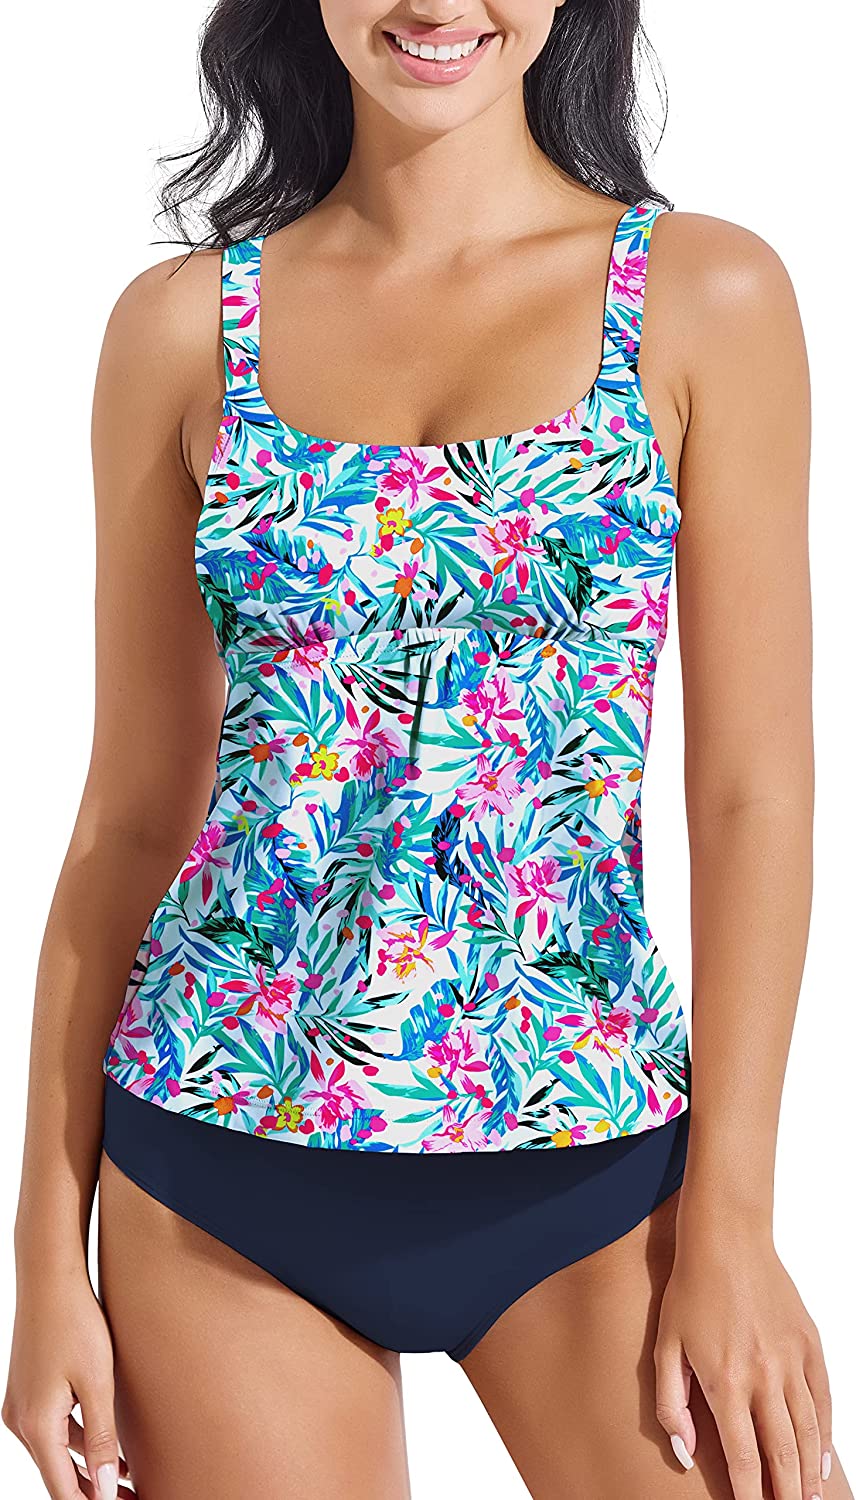 Beautikini Women's Two Piece Tankini Swimsuits, Floral Printed Bathing Suits Flowy Tank Top with Shorts Blouson Swimwear